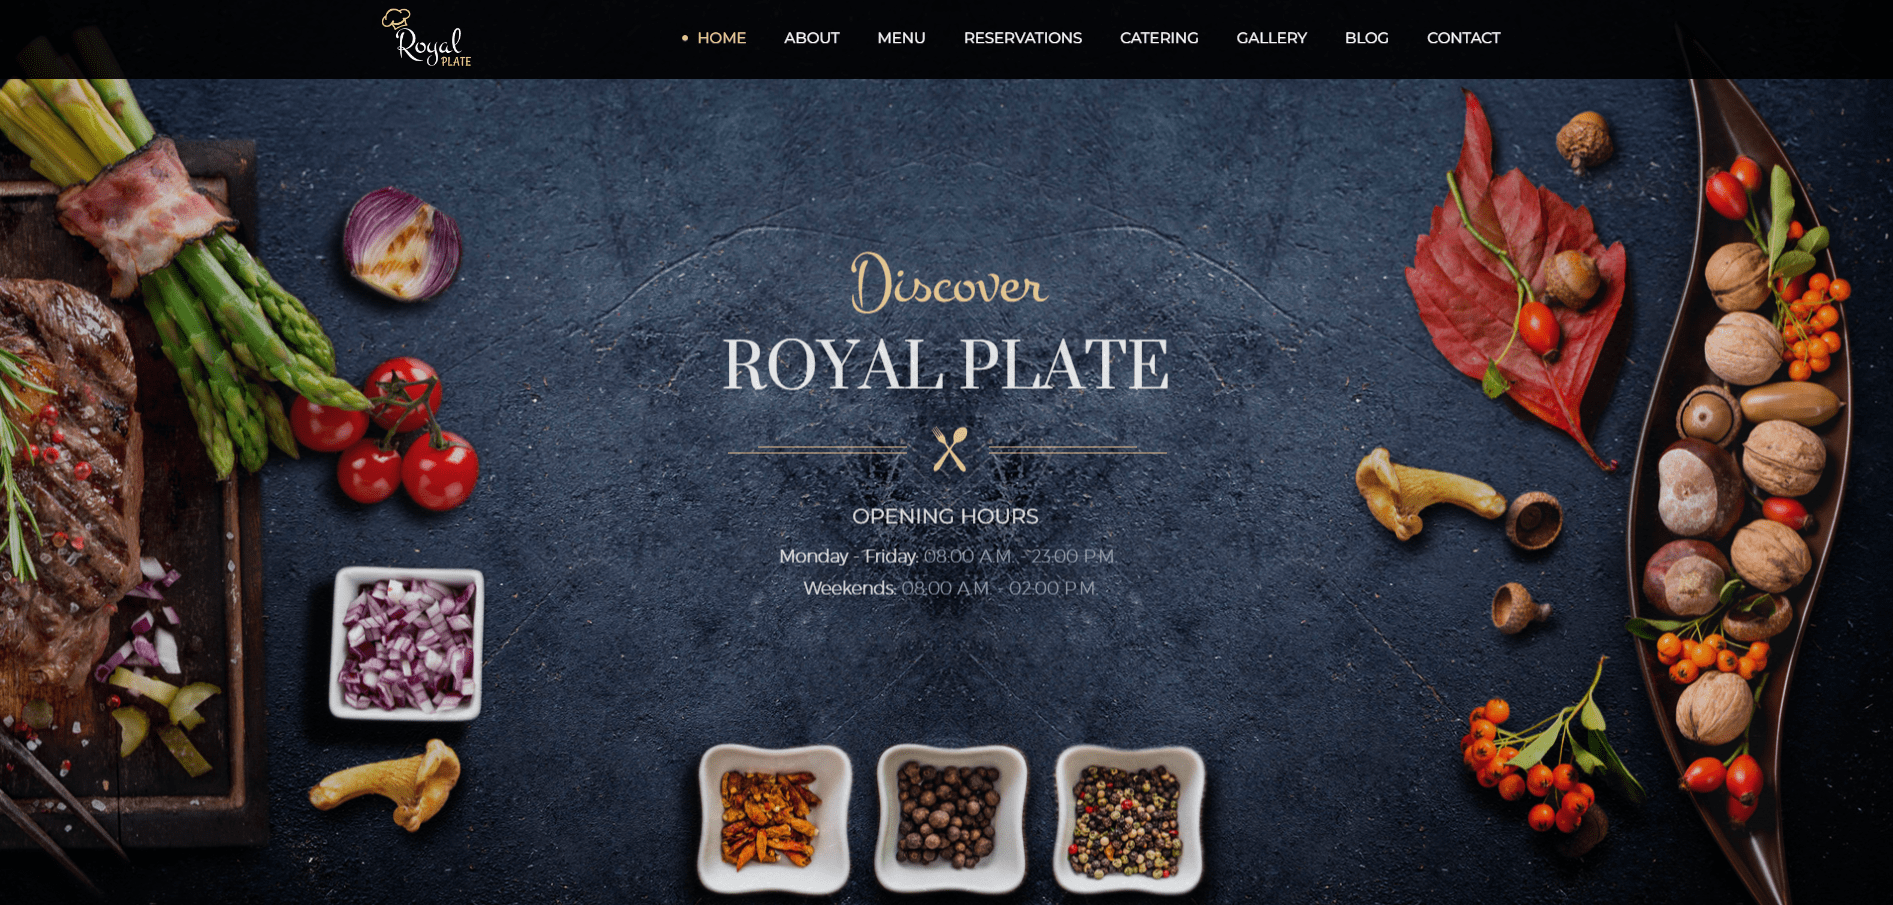 Royal Plate - Restaurant and Catering HTML Template